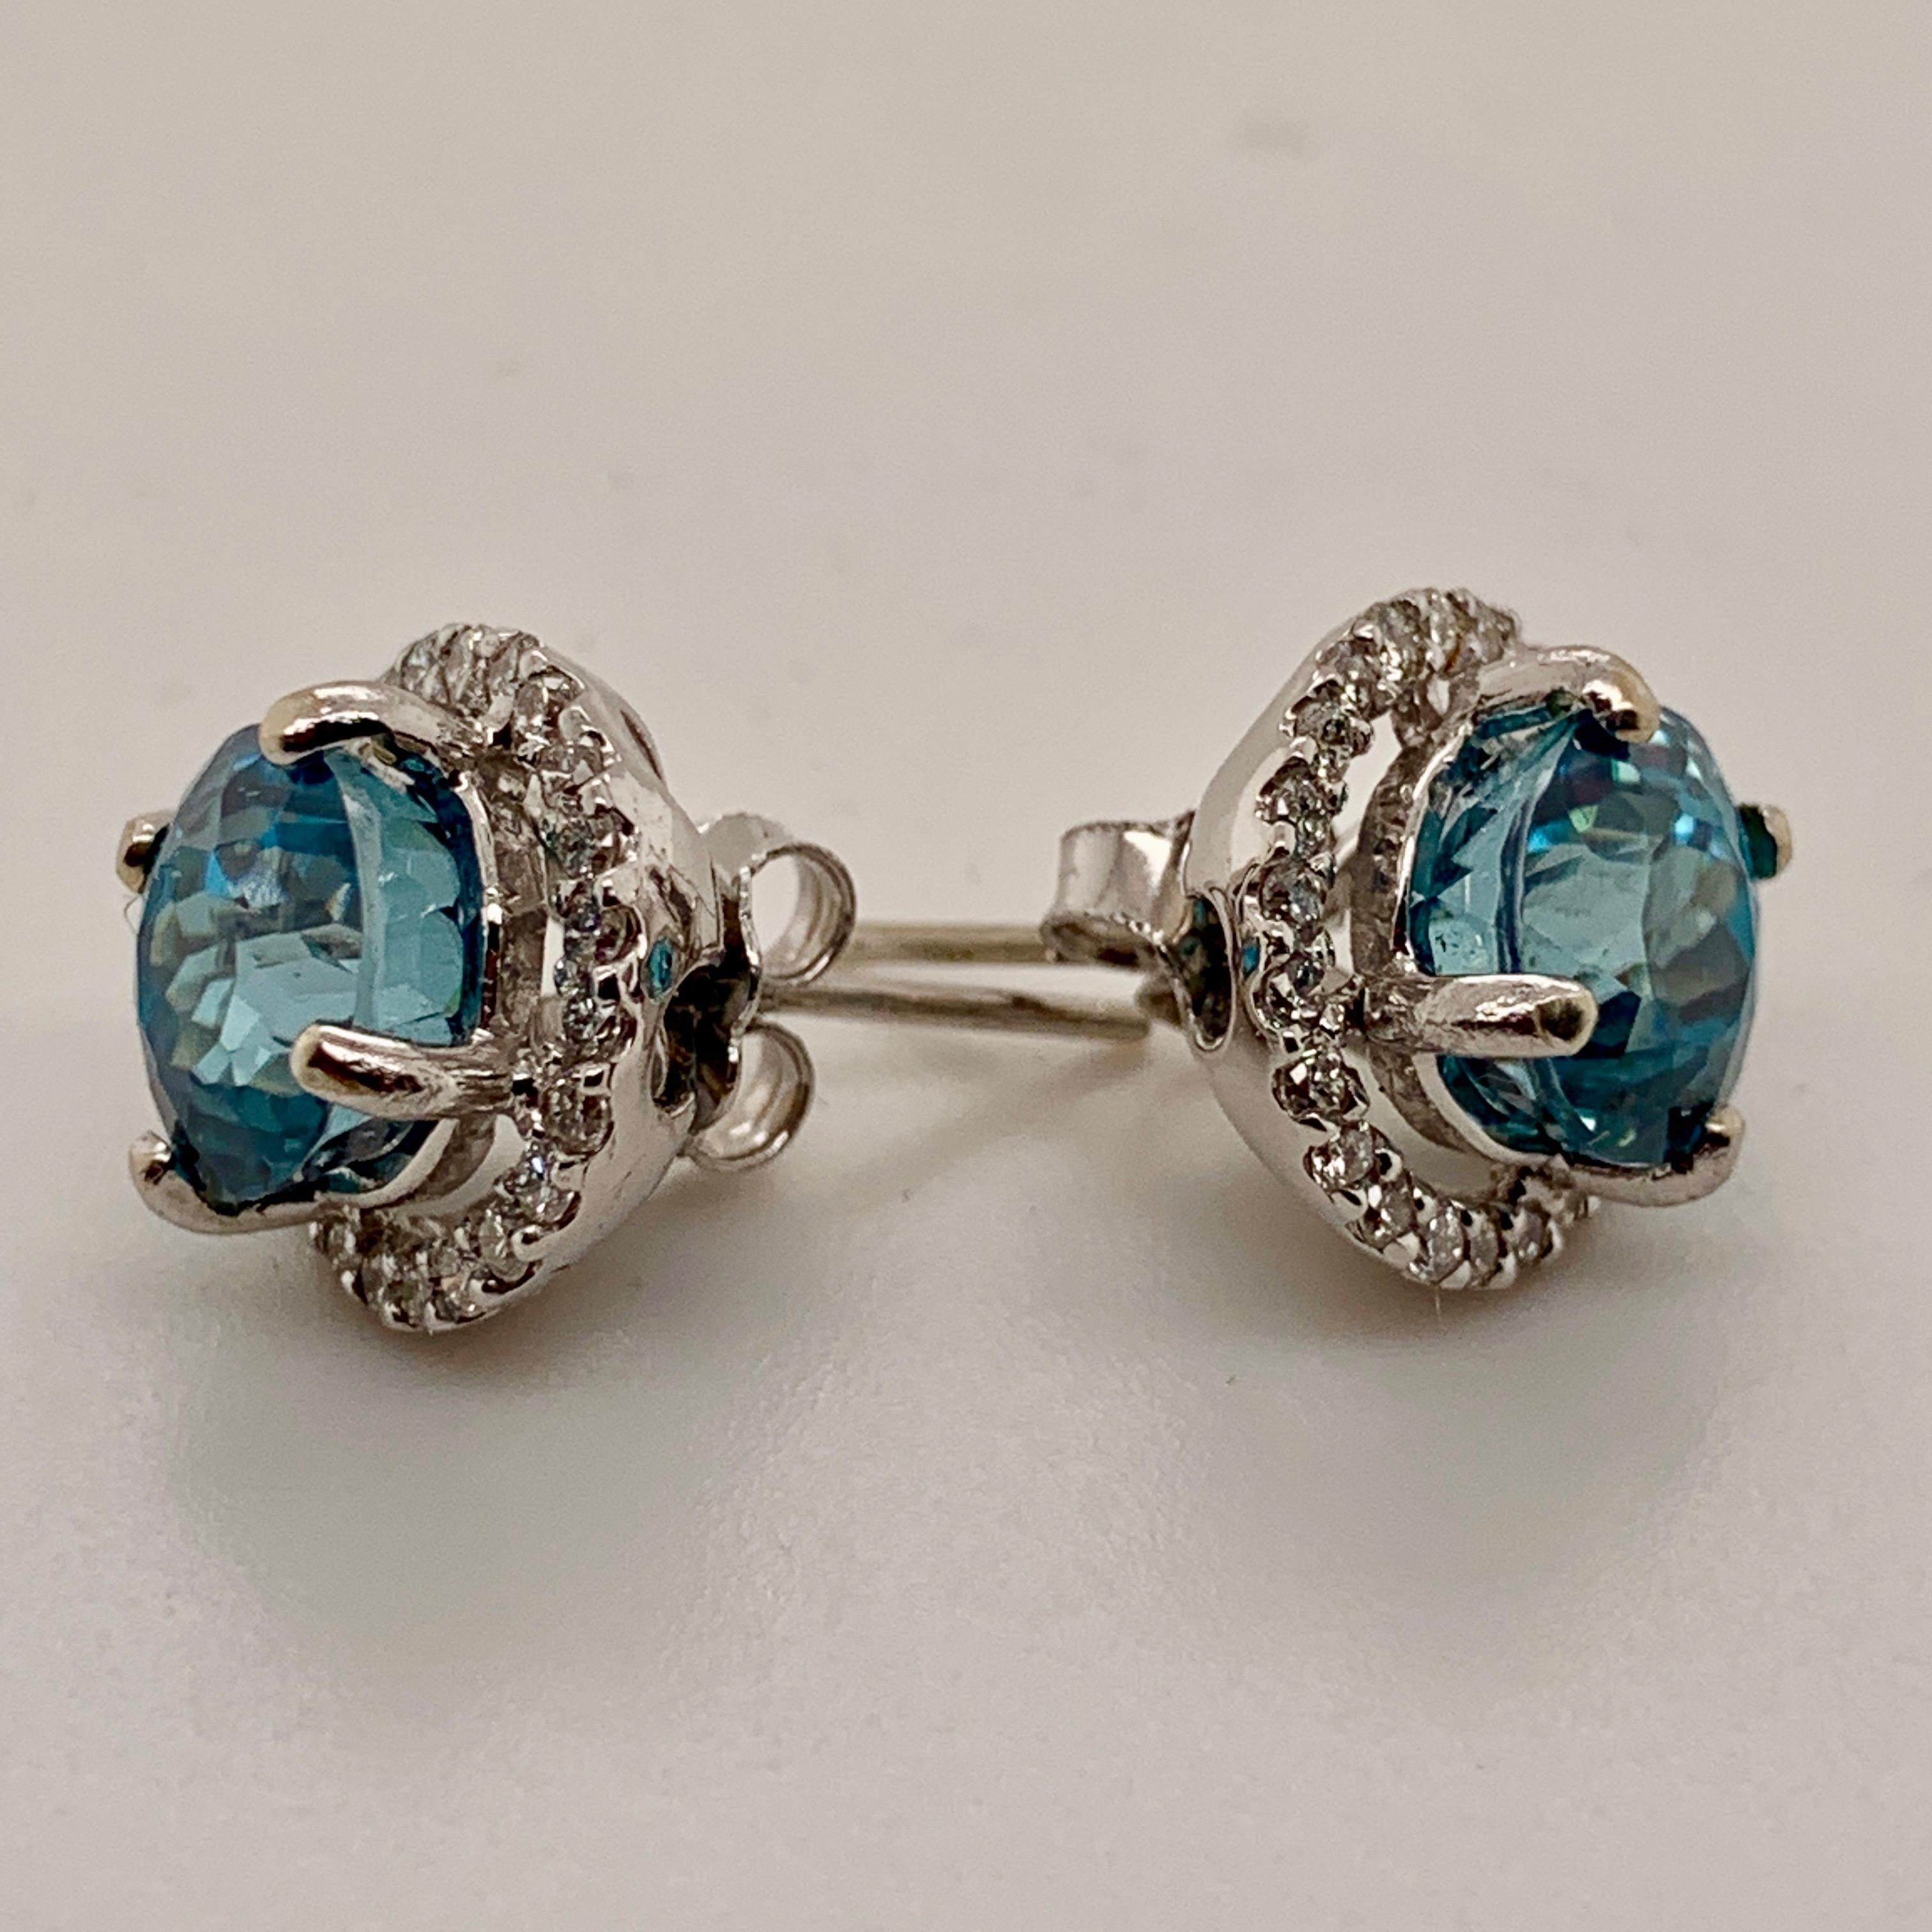 Blue Zircons are the birthstone for December. Most of the rich blue colors come from Cambodia. They come out of the ground brown and are heat treated to a vivid blue. These highly double reflective gemstones have been known since antiquity. 
This